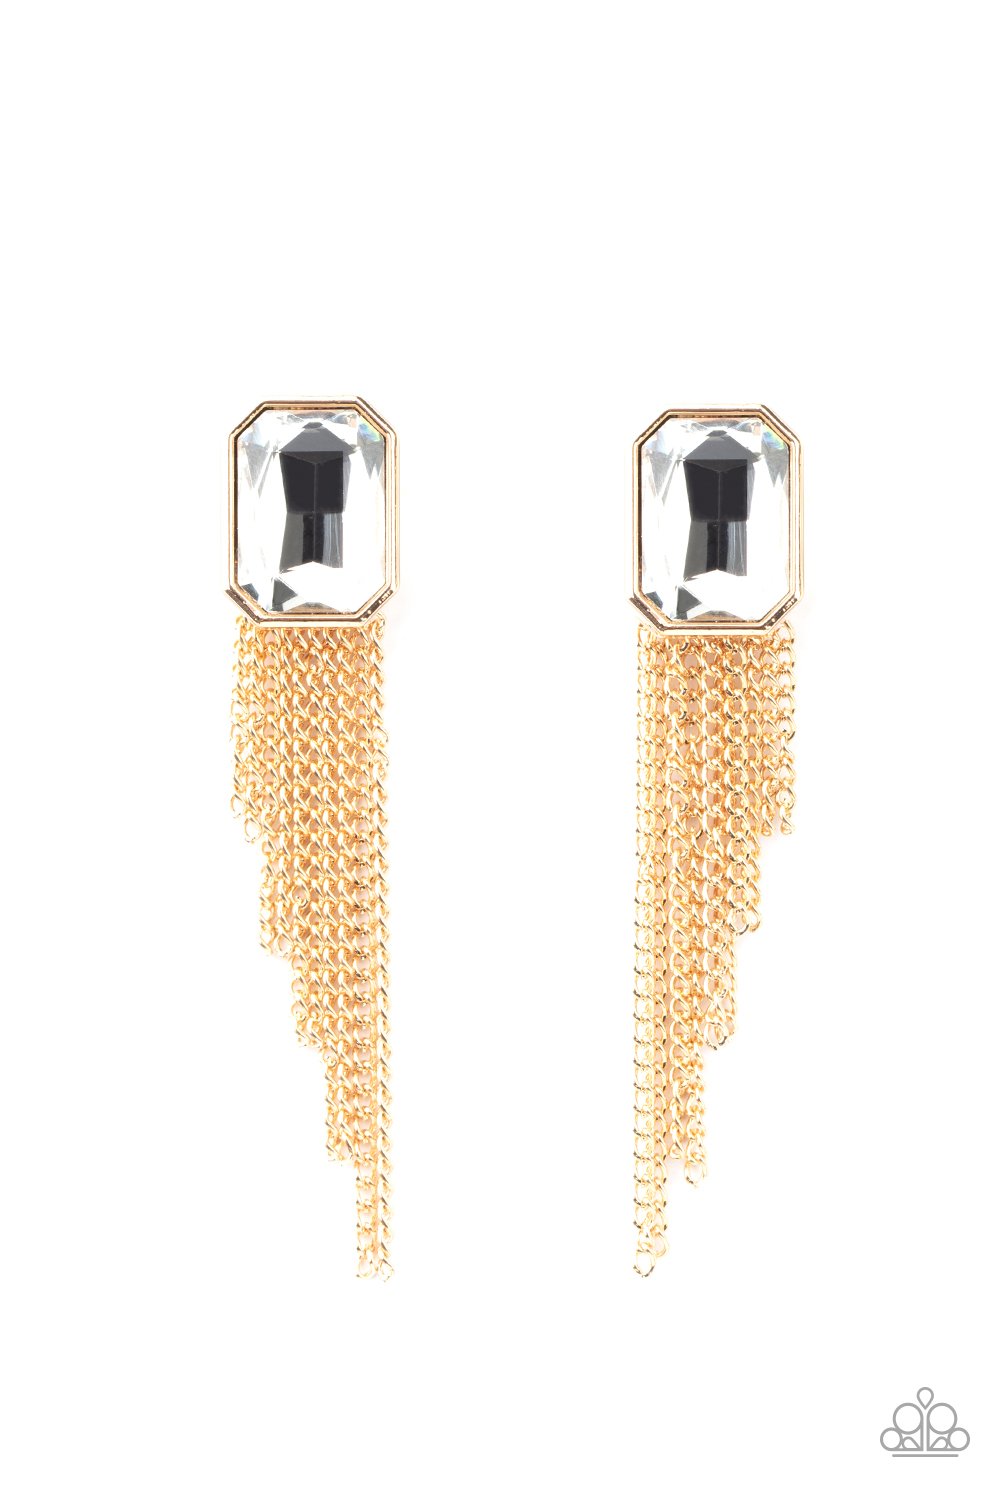 &lt;p&gt;Tapered gold chains stream from the bottom of an oversized white emerald cut gem, creating a regal fringe. Earring attaches to a standard post fitting.&lt;/p&gt;
&lt;p&gt;&lt;i&gt; Sold as one pair of double-sided post earrings. &lt;/i&gt;&lt;/p&gt;